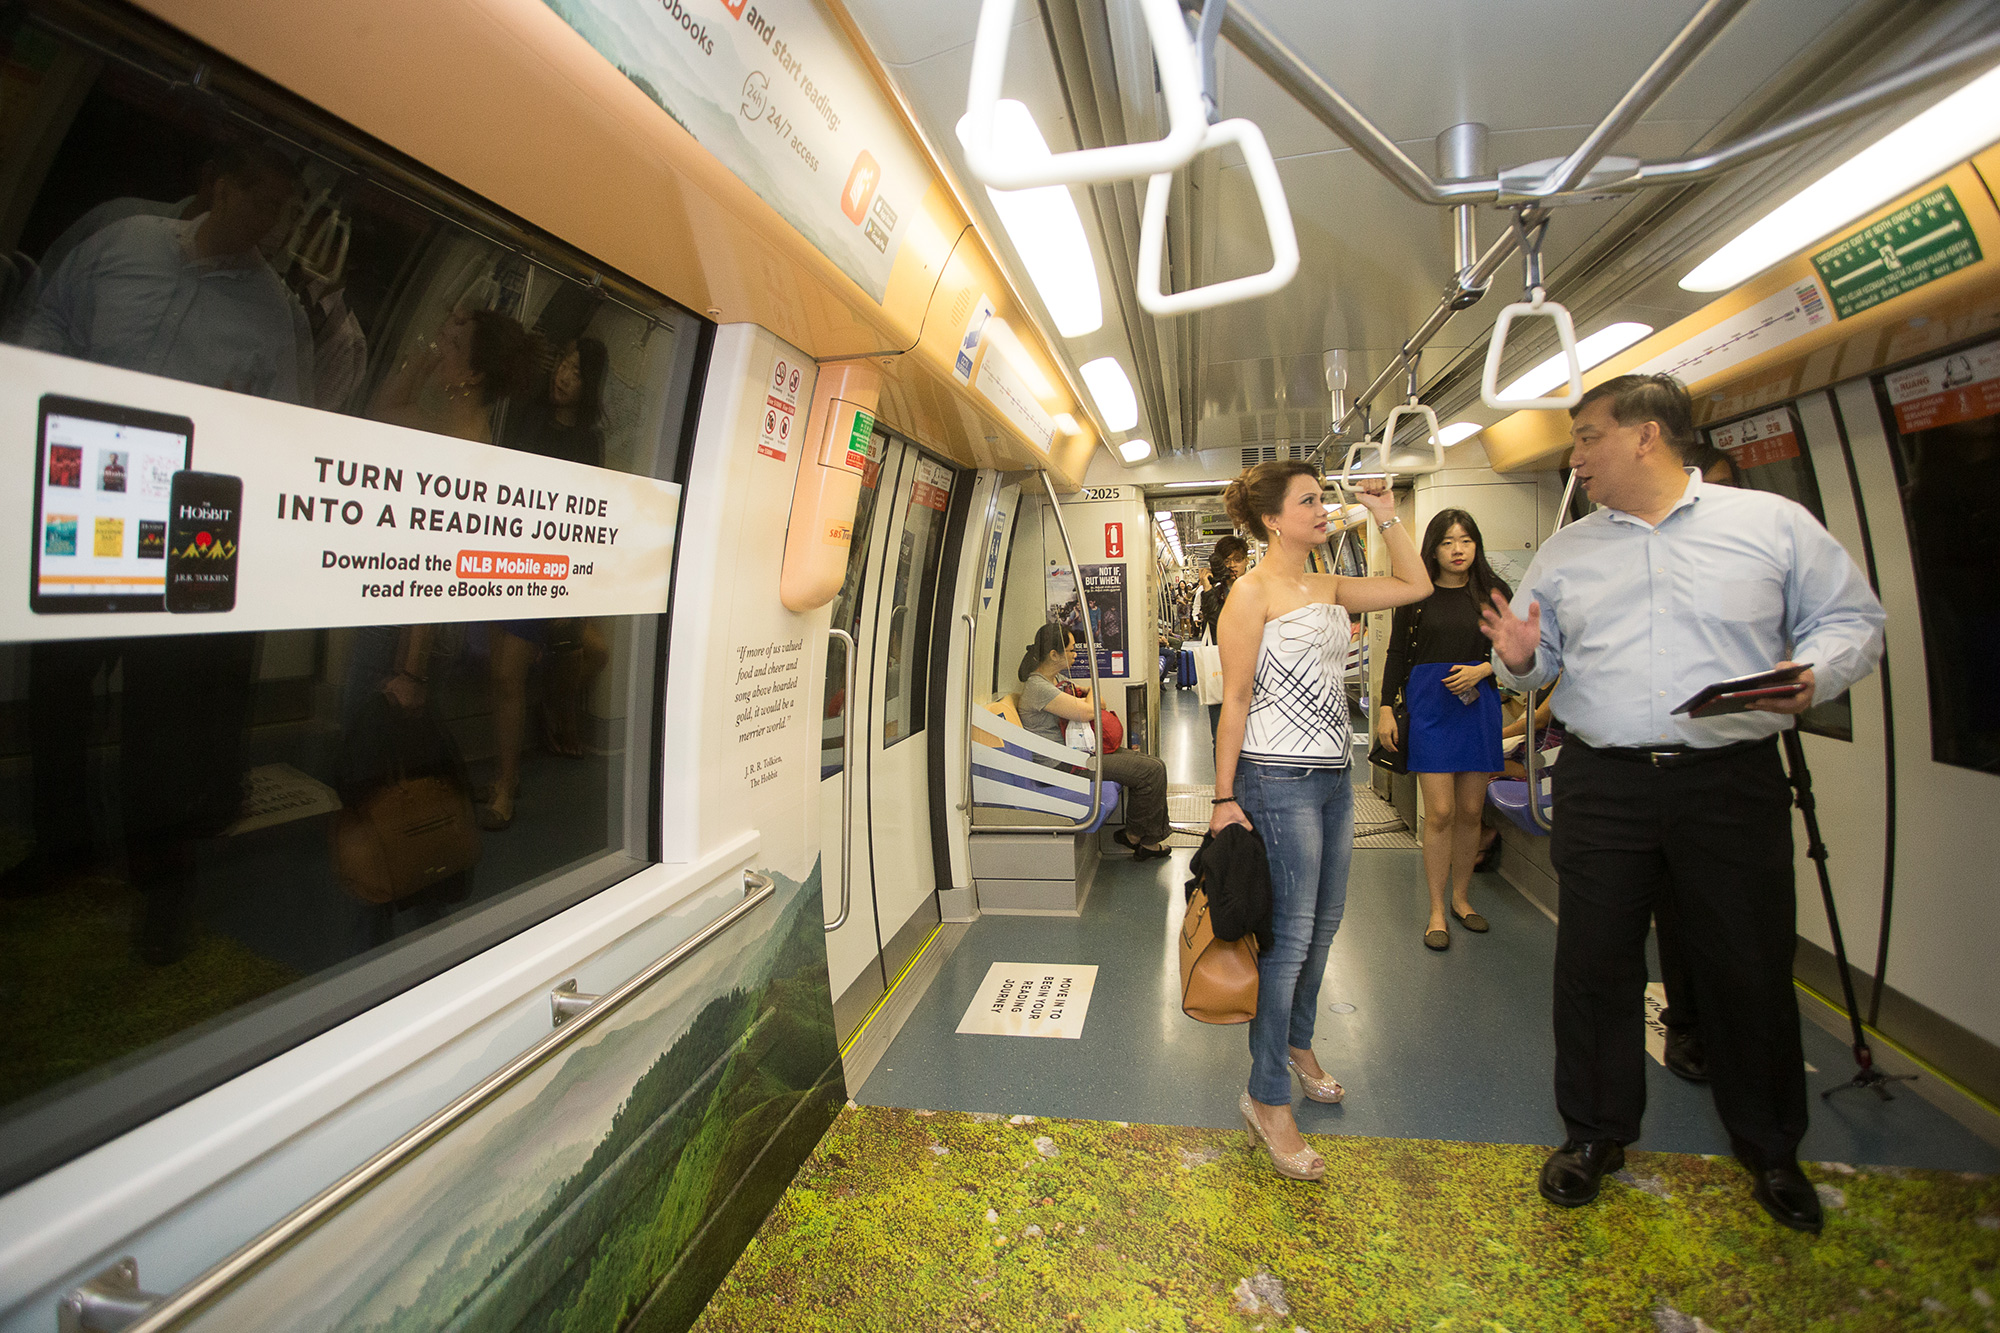 Siow Shong Seng, Director of Technology & Service Innovation, National Library Board (NLB) bringing Michelle Martin, NLB Reading Ambassador and radio presenter of 938LIVE, on a tour of the library-themed train at the launch event for NLB’s new mobile app.